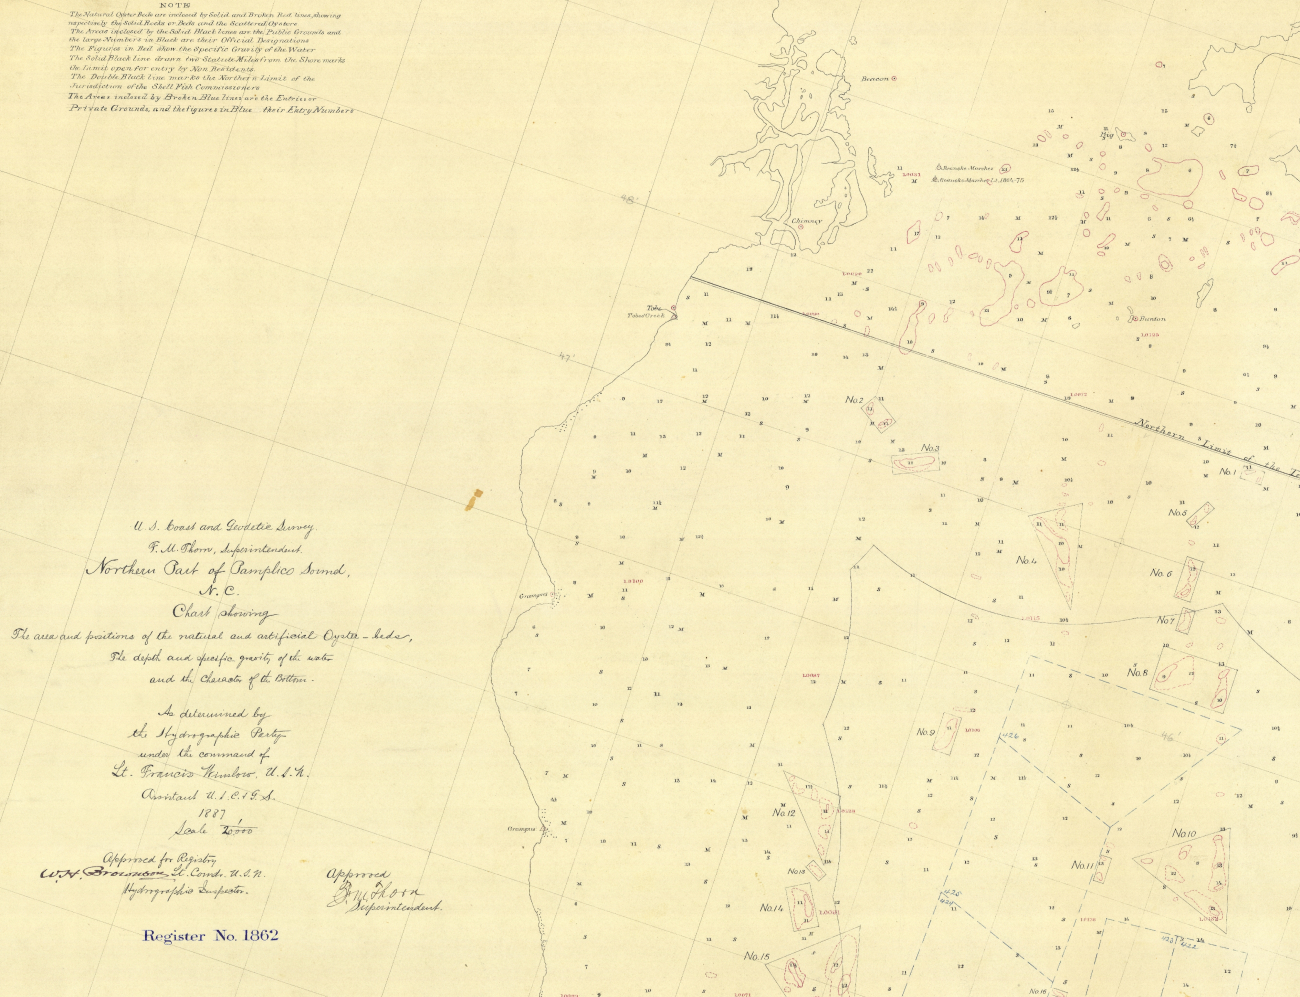 Hydrographic survey H-1862 of Northern Part of Pamlico Sound, N